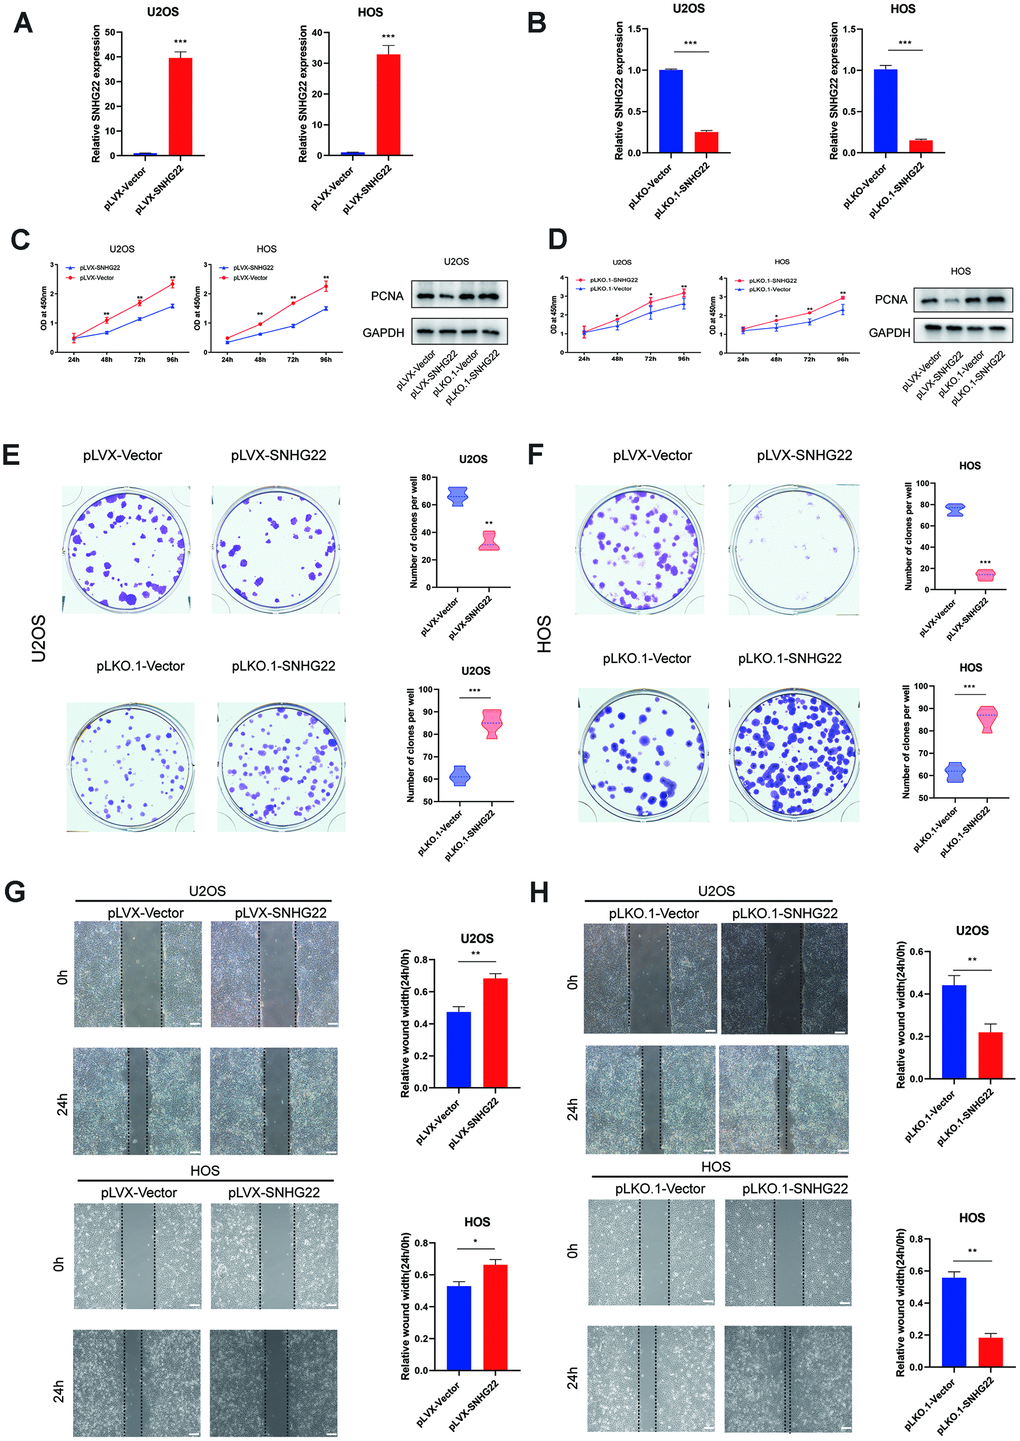 SNHG22 influenced the proliferation and migration of OS cells. (A, B) The qRT-PCR measured the transfection efficiency of SNHG22 in U2OS and HOS cells. n=5; ***Pt test. (C, D) Overexpression of SNHG22 reduced the cell viability of U2OS and HOS cells while SNHG22 knockdown showed the reverse effect. Cell viability and proliferation were assessed by CCK-8 assays and western blots. n=5; *P**PE, F) Colony formation of HOS and U2OS cell lines was synergistically suppressed by overexpression of SNHG22 and was obviously enhanced by SNHG22 silencing. The number of clones is shown in the violin plot. n=5; **P***Pt-test. (G, H) Cell migration rates of U2OS and HOS cells were measured by wound healing assays; scale bar: 100 μm. n=5; *P**P***Pt-test.